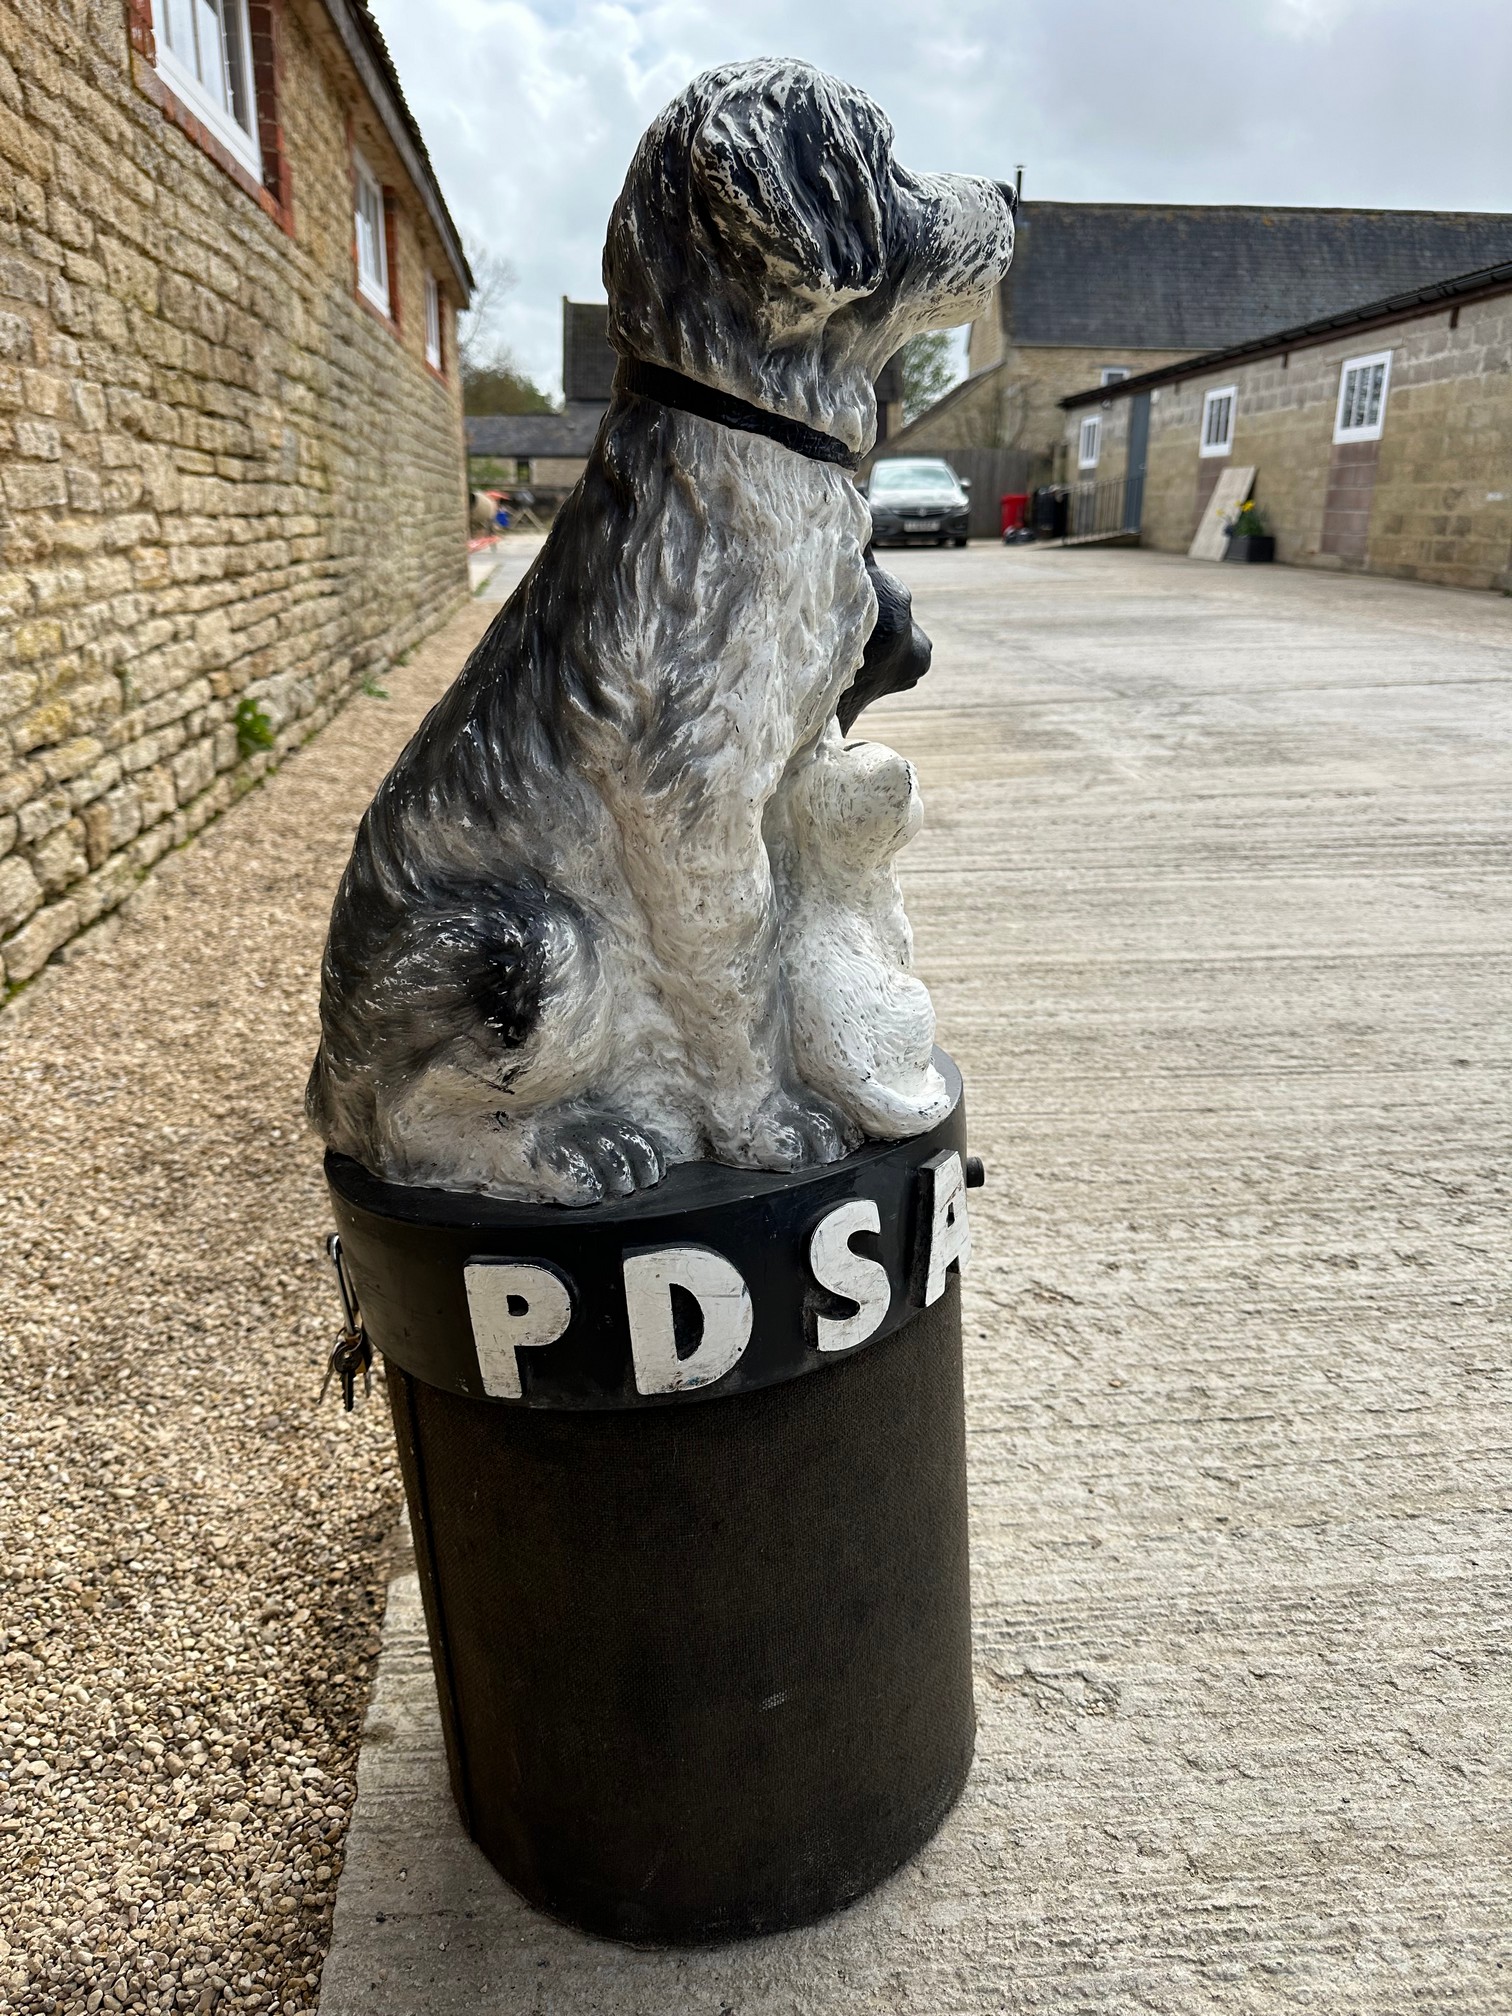 A PDSA charity donation box with a dog and two cats, 39" tall. - Image 2 of 4